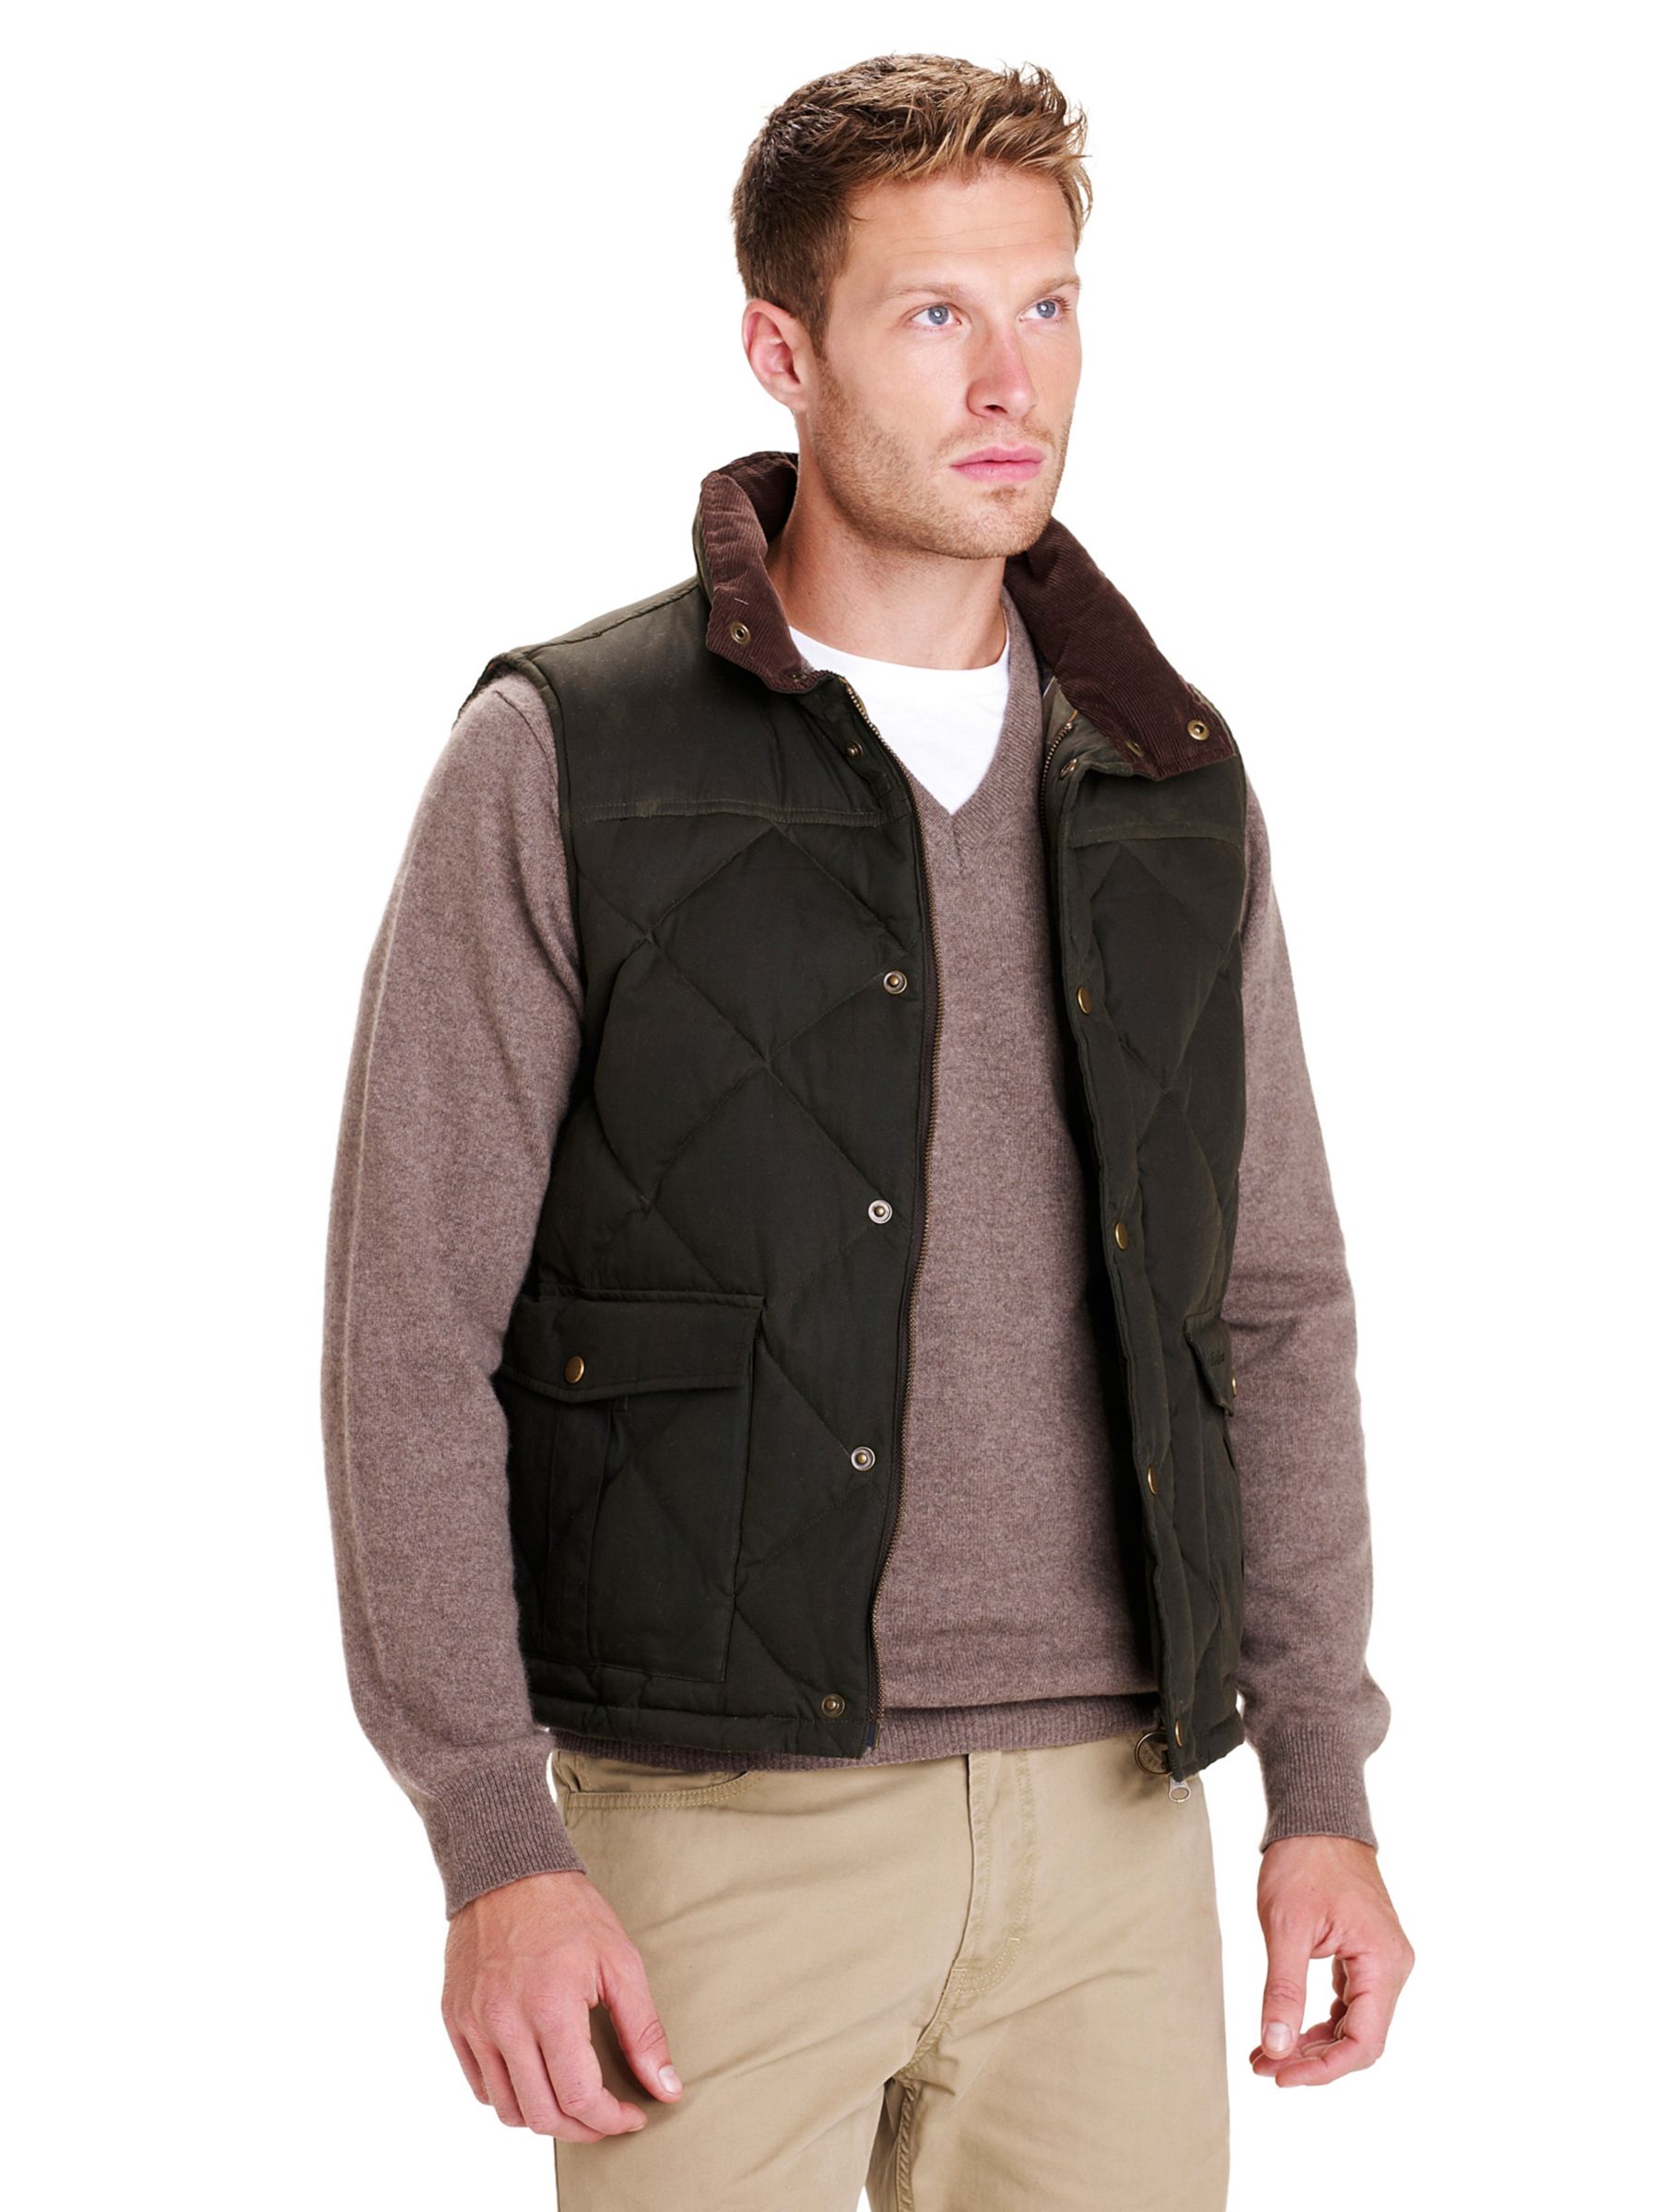 Barbour Down Wax Gilet, Olive at John Lewis